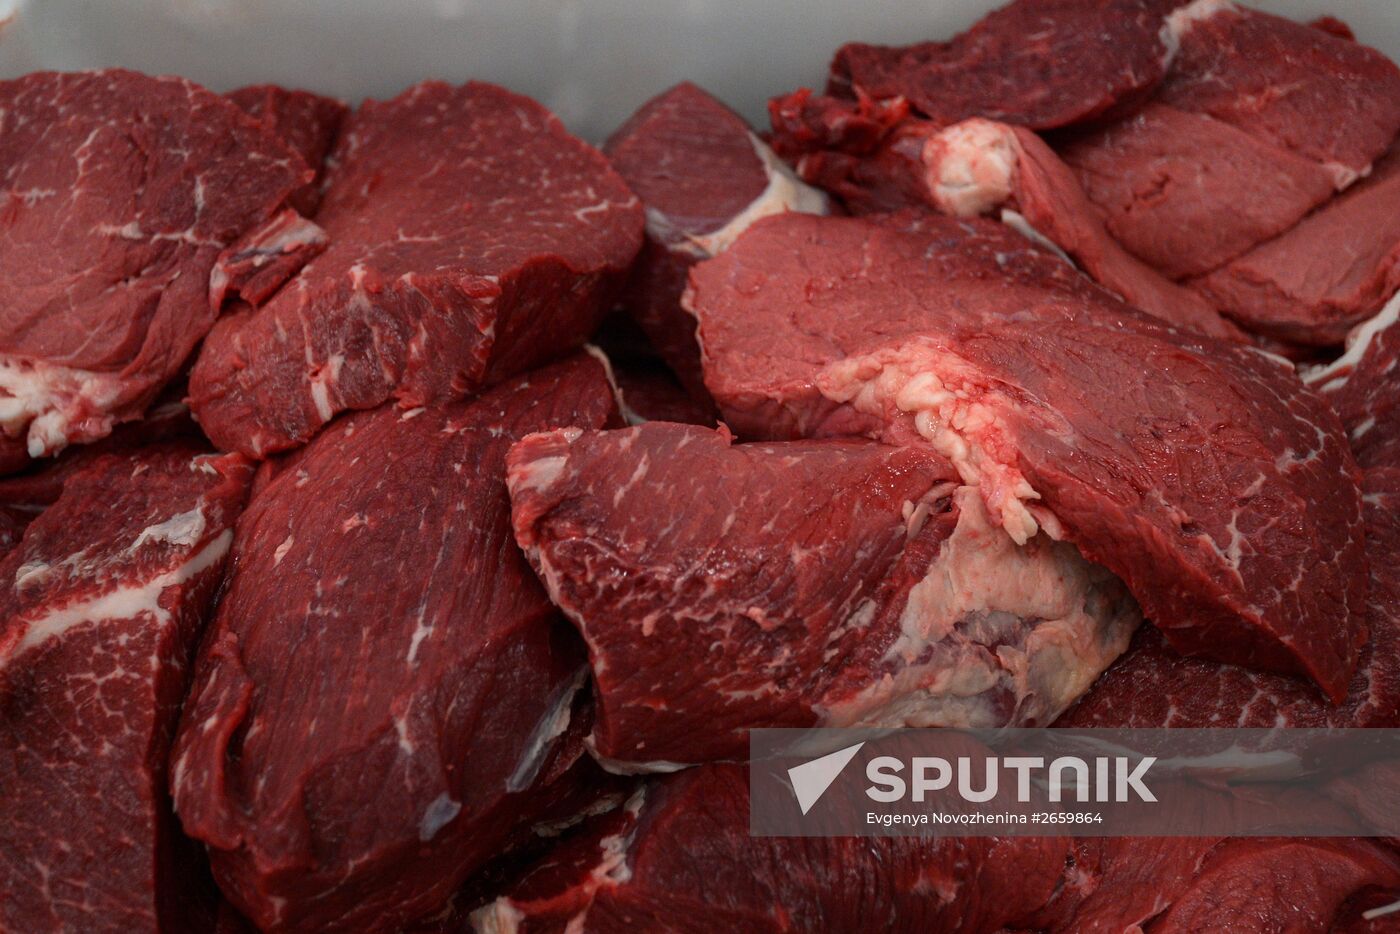 Miratorg Agro-Industrial Holding's meat processing facility in Bryansk Region